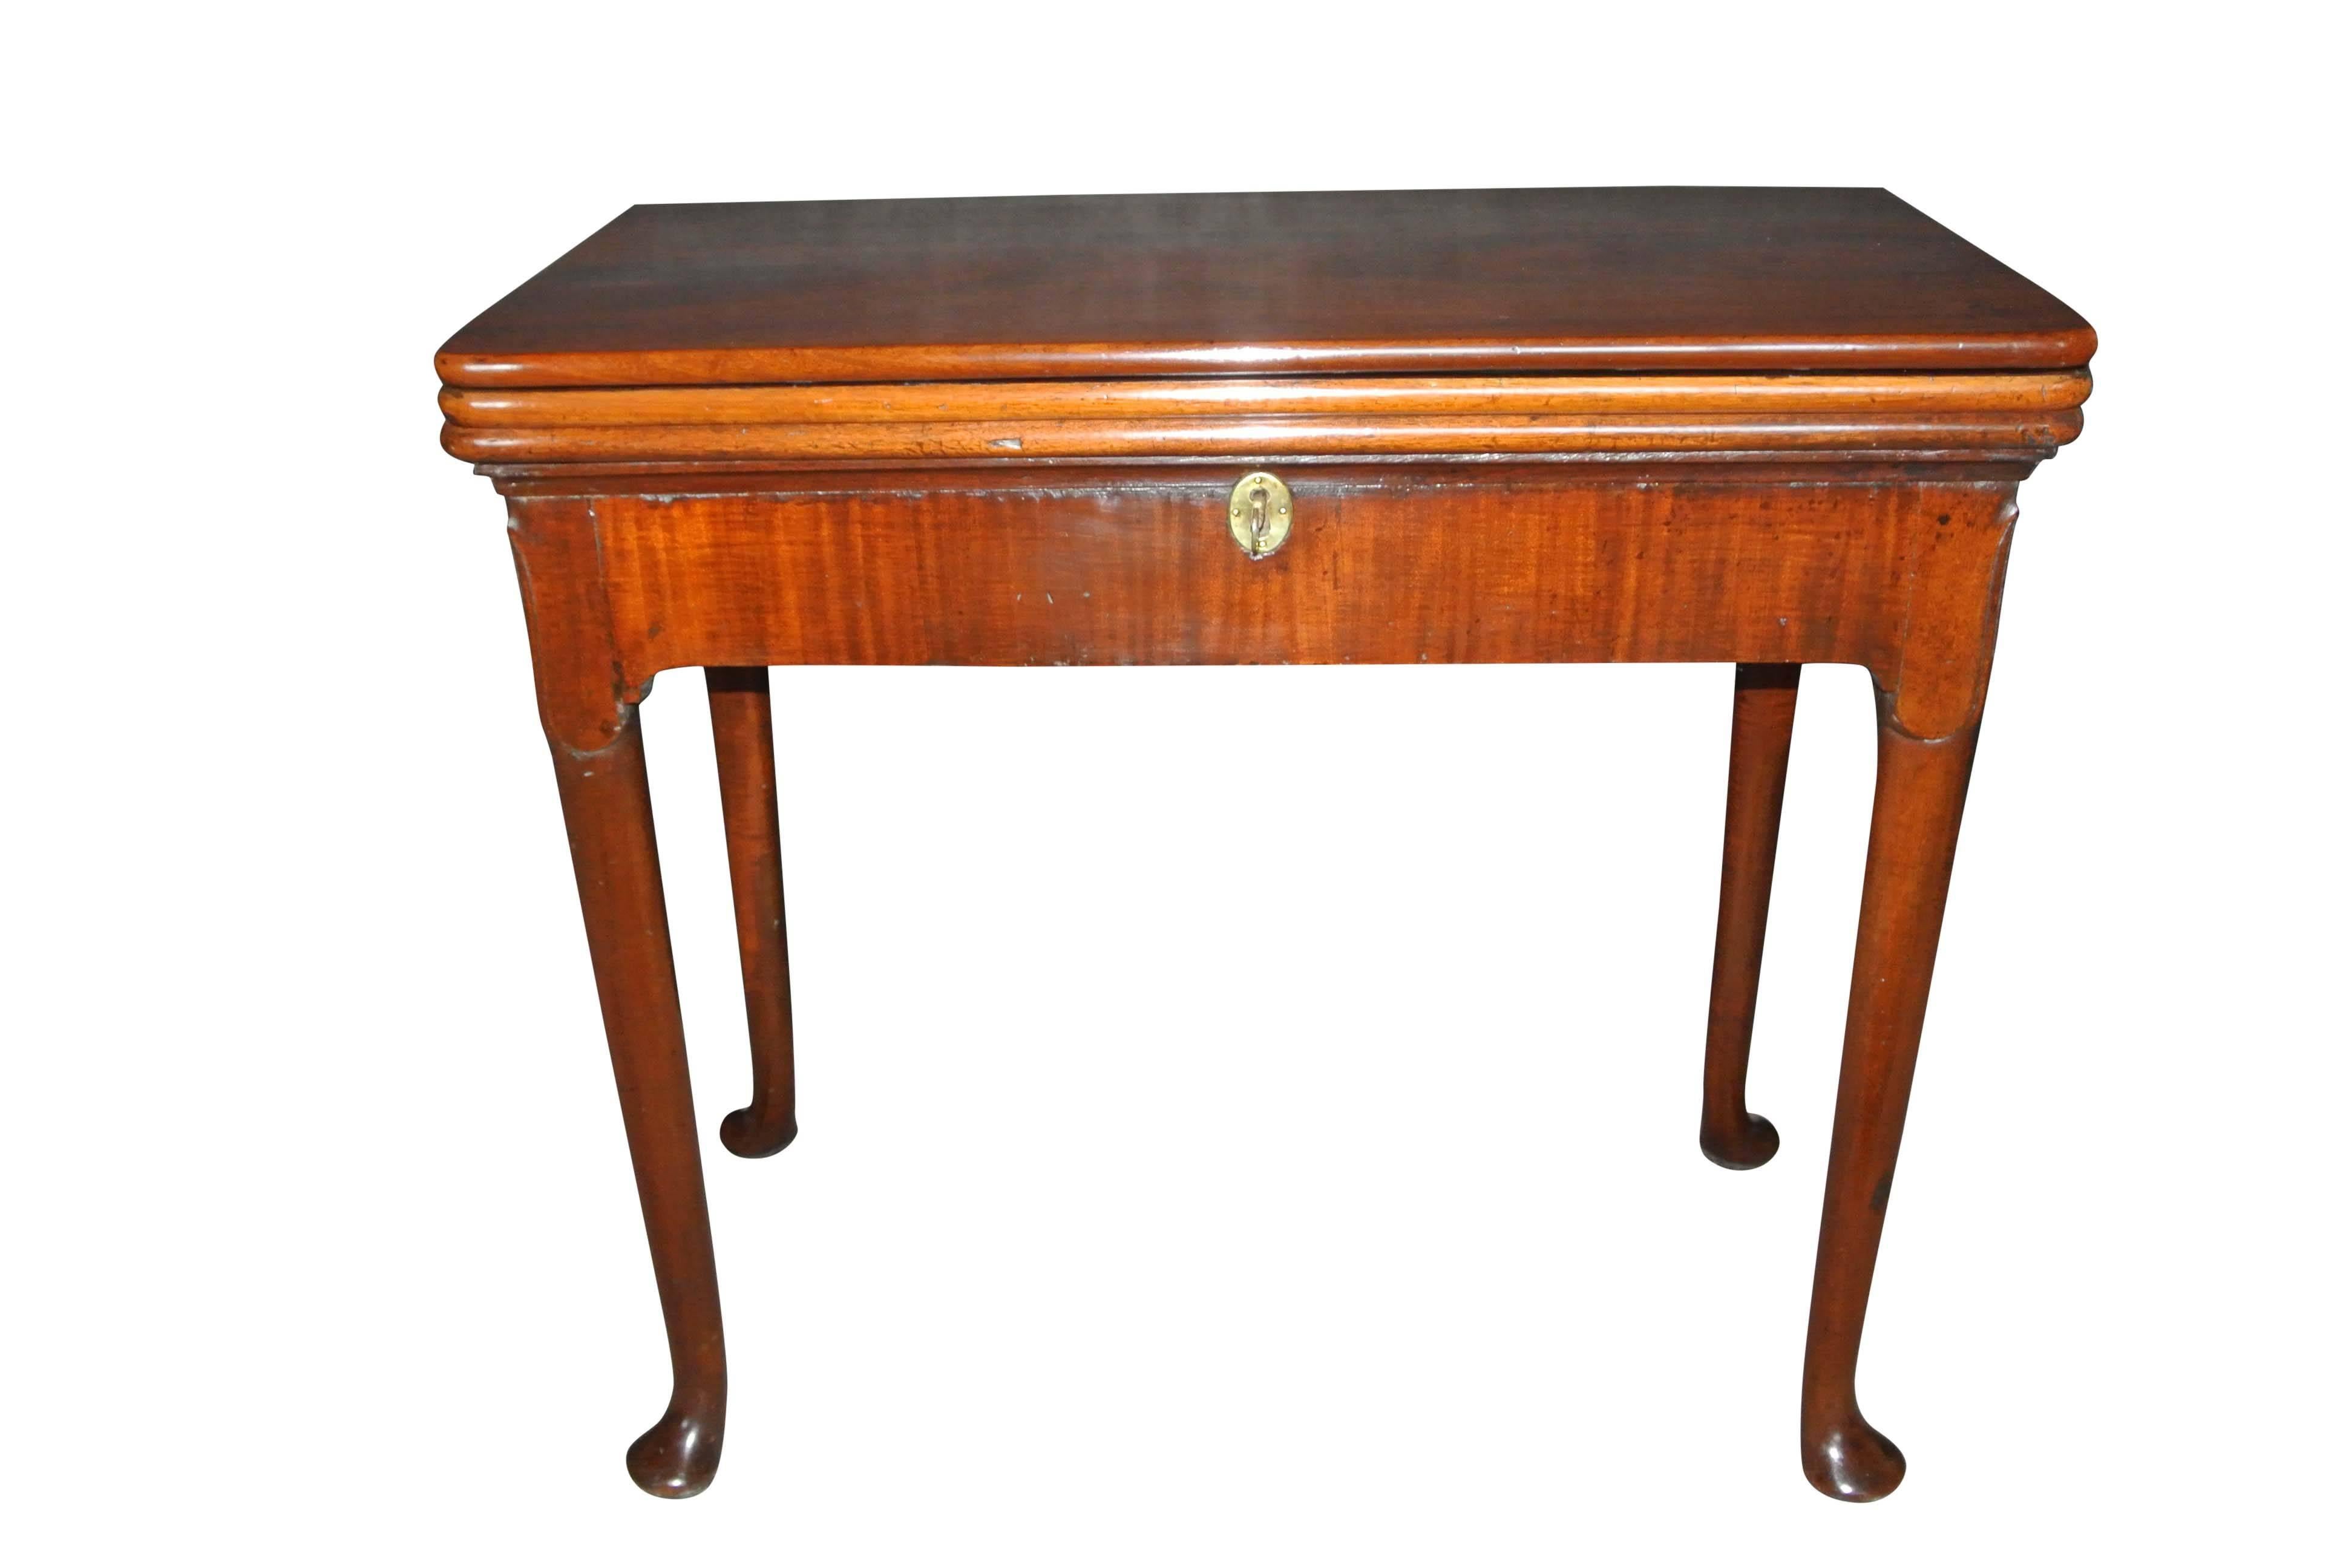 A rare antique George ii triple top mahogany backgammon and cards table with locking concertina action back legs on tapering legs and pad feet. Excellent condition.